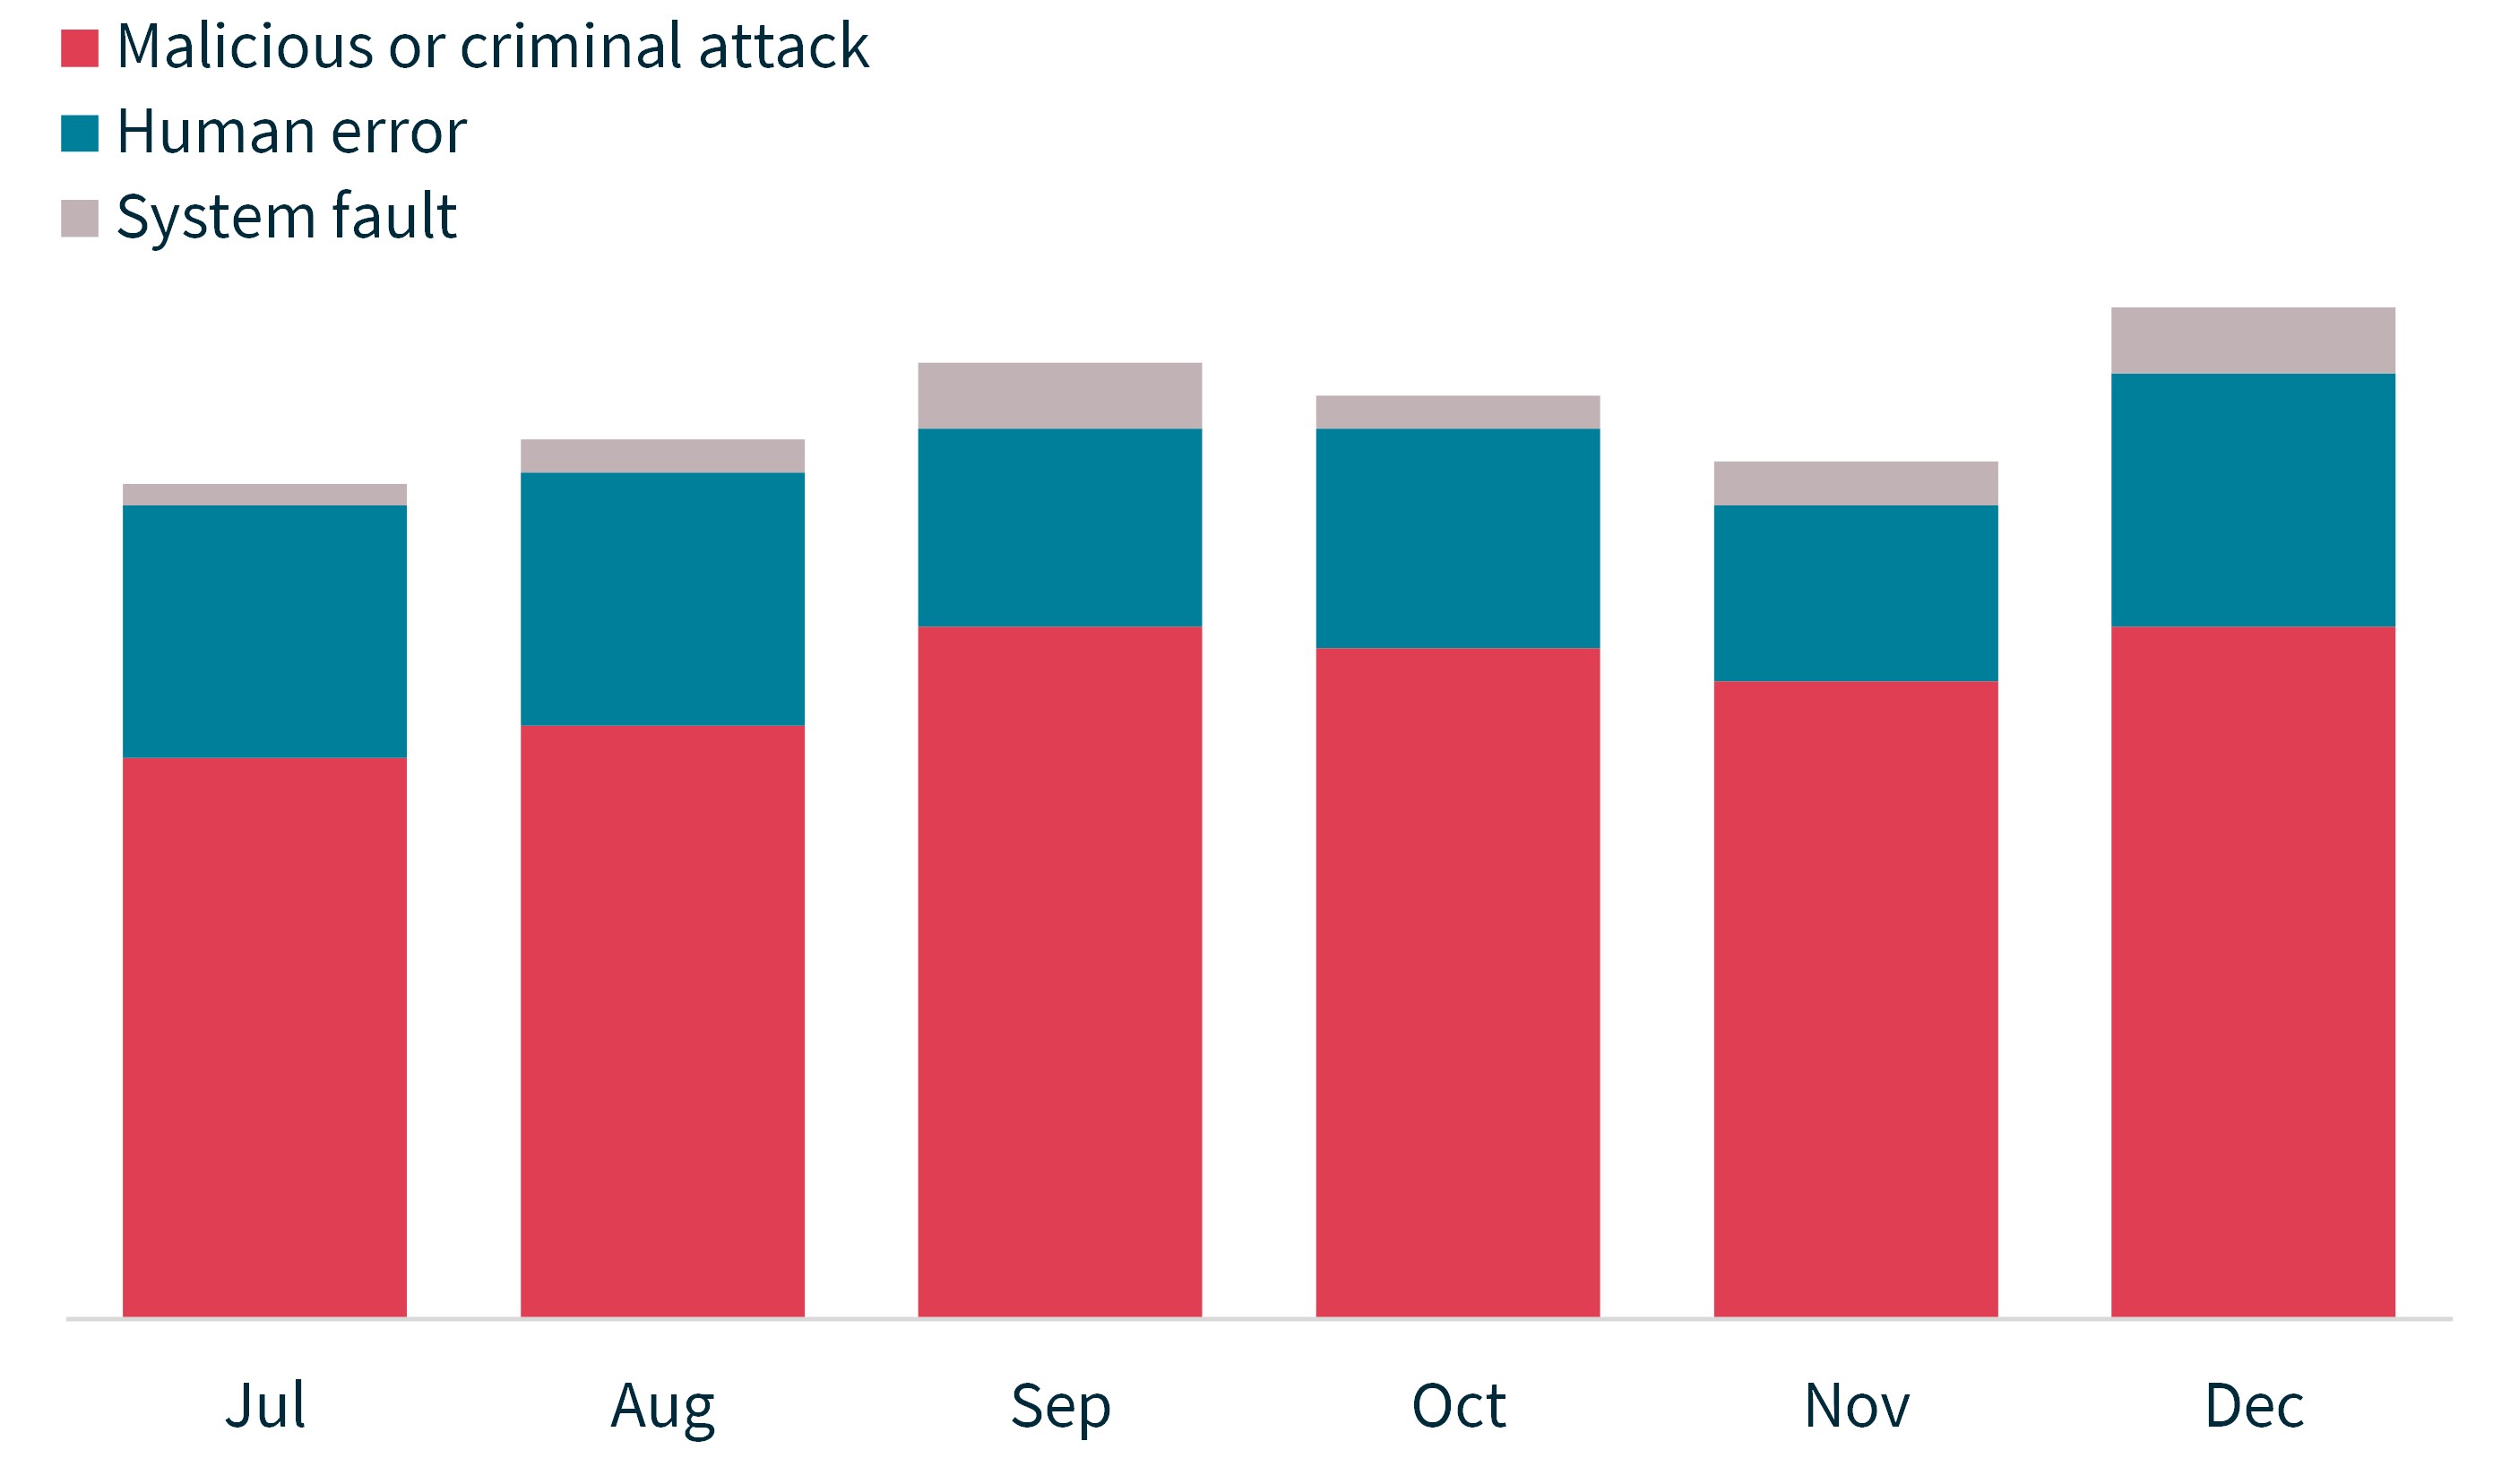 Chart 2 - Notifications received by month showing the sources of breaches